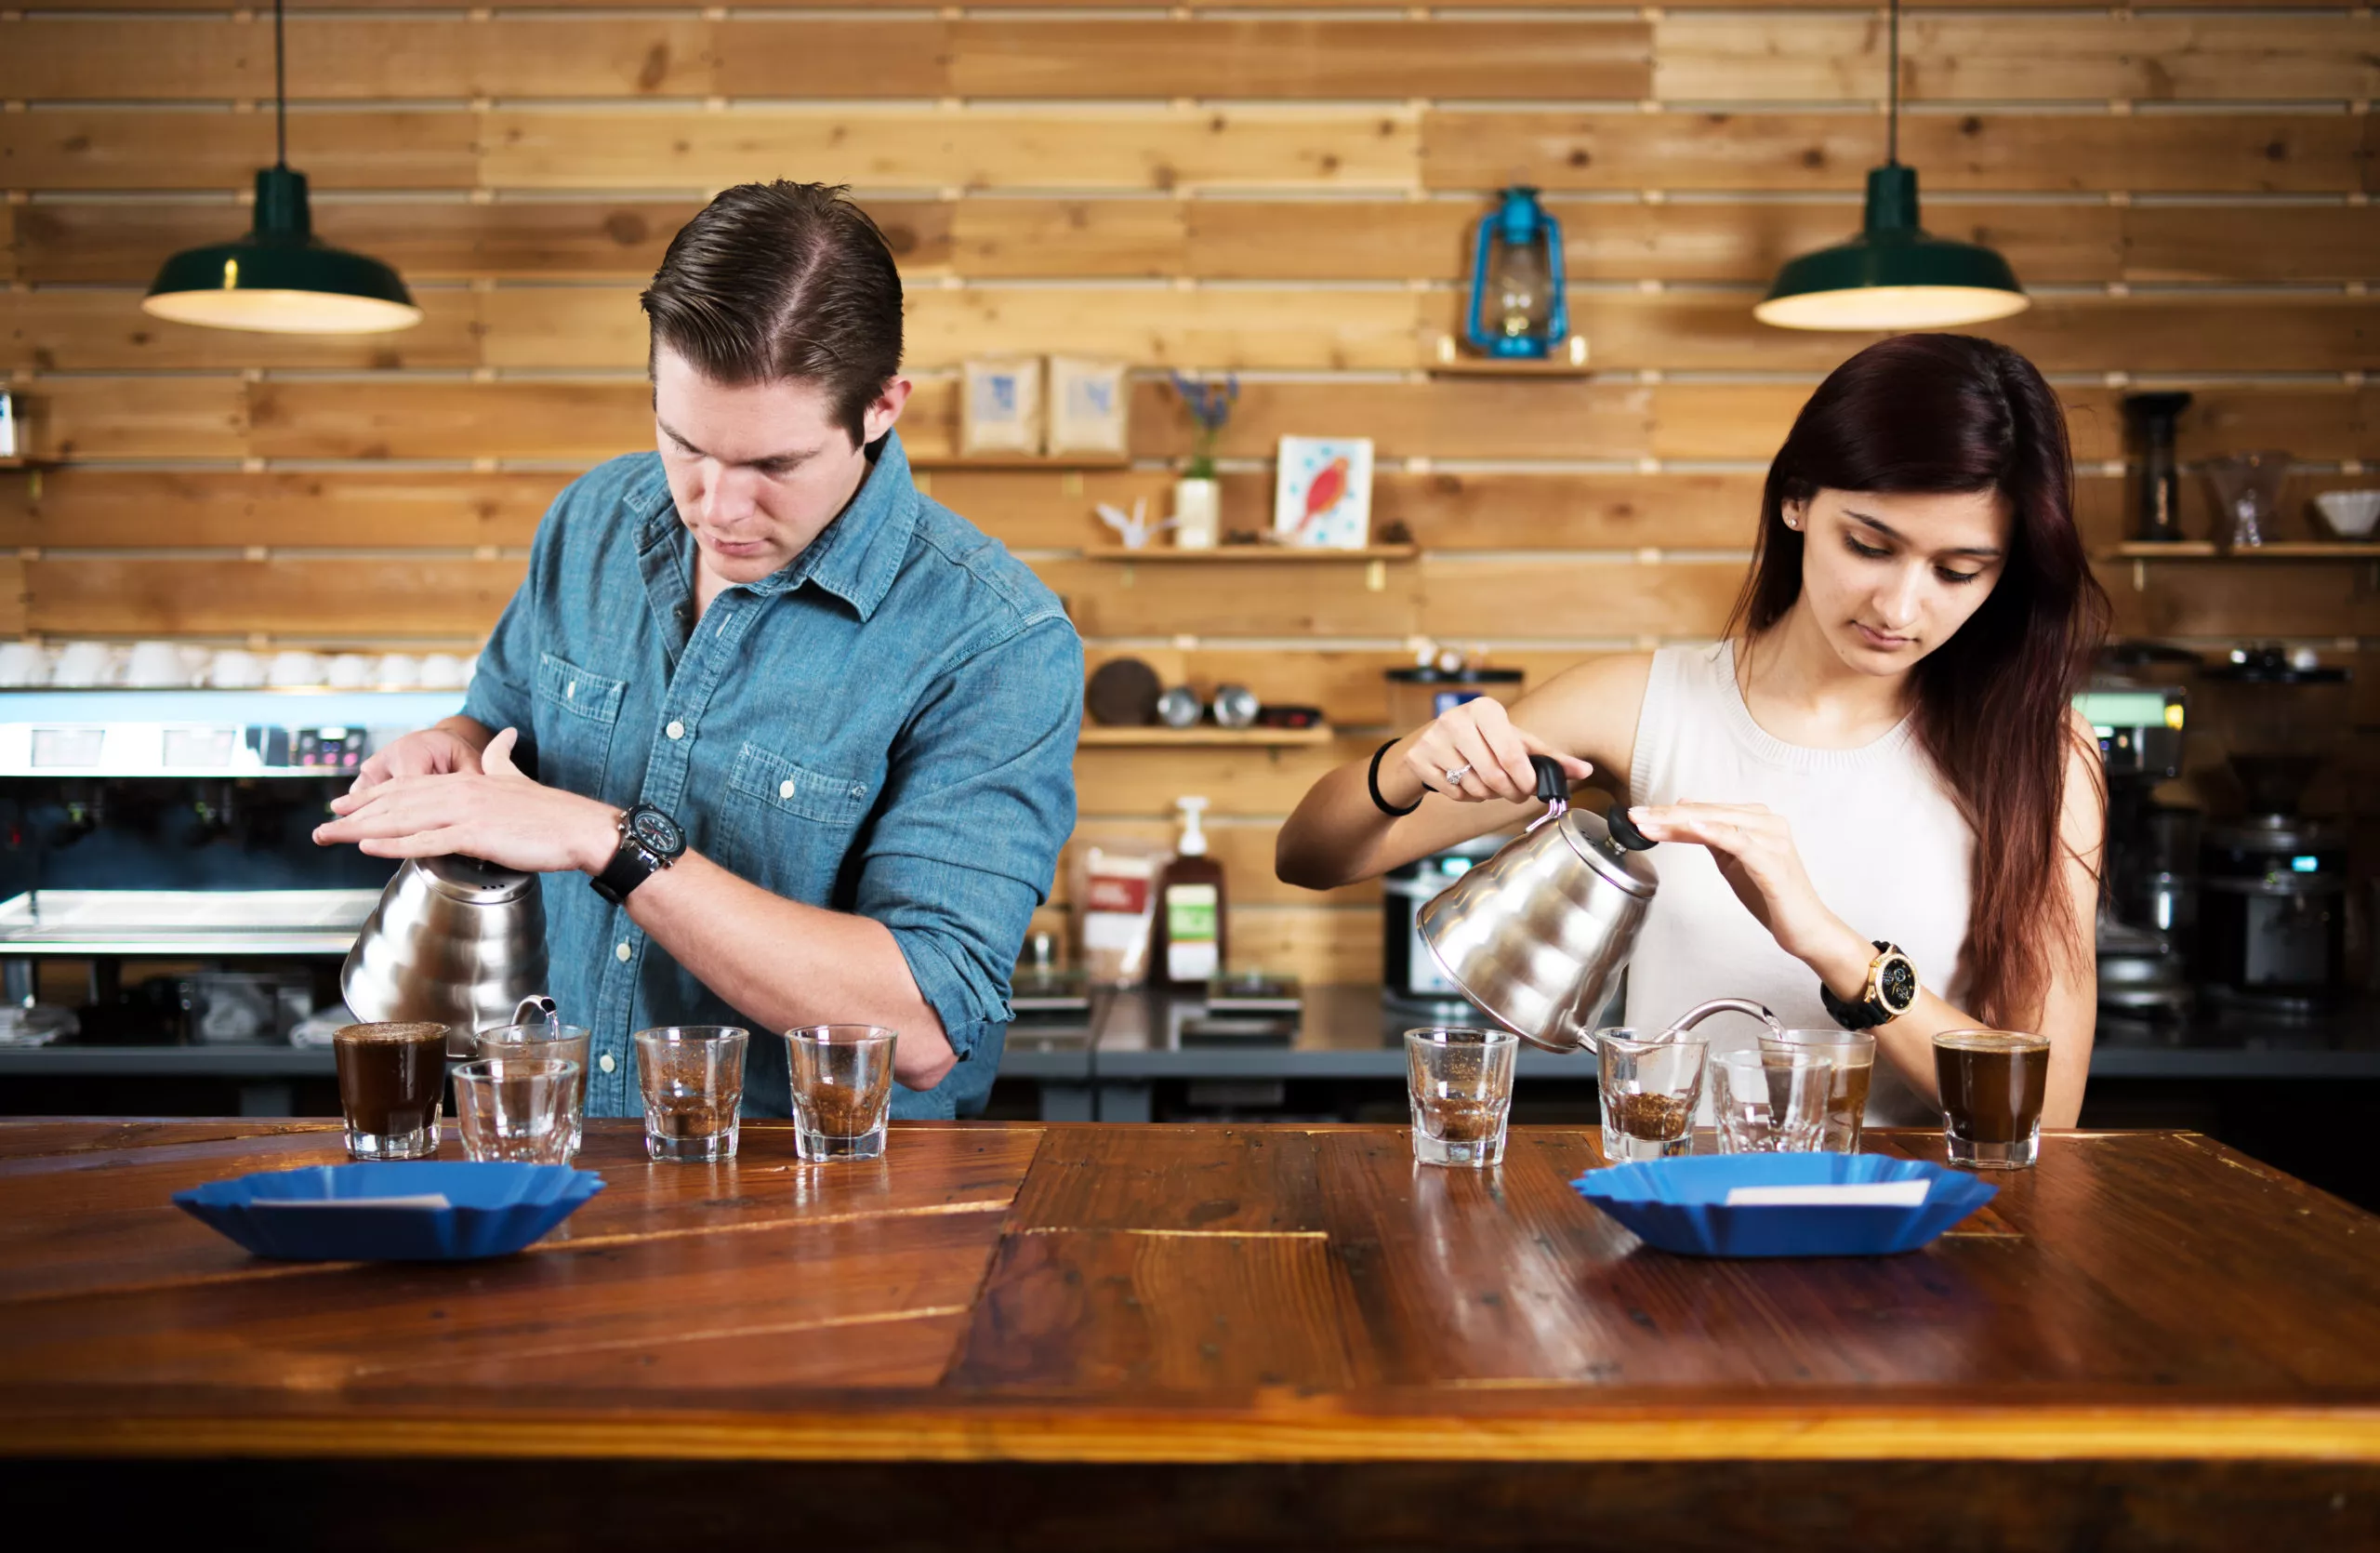 Why Are We One of the Best Coffee and Barista Schools?